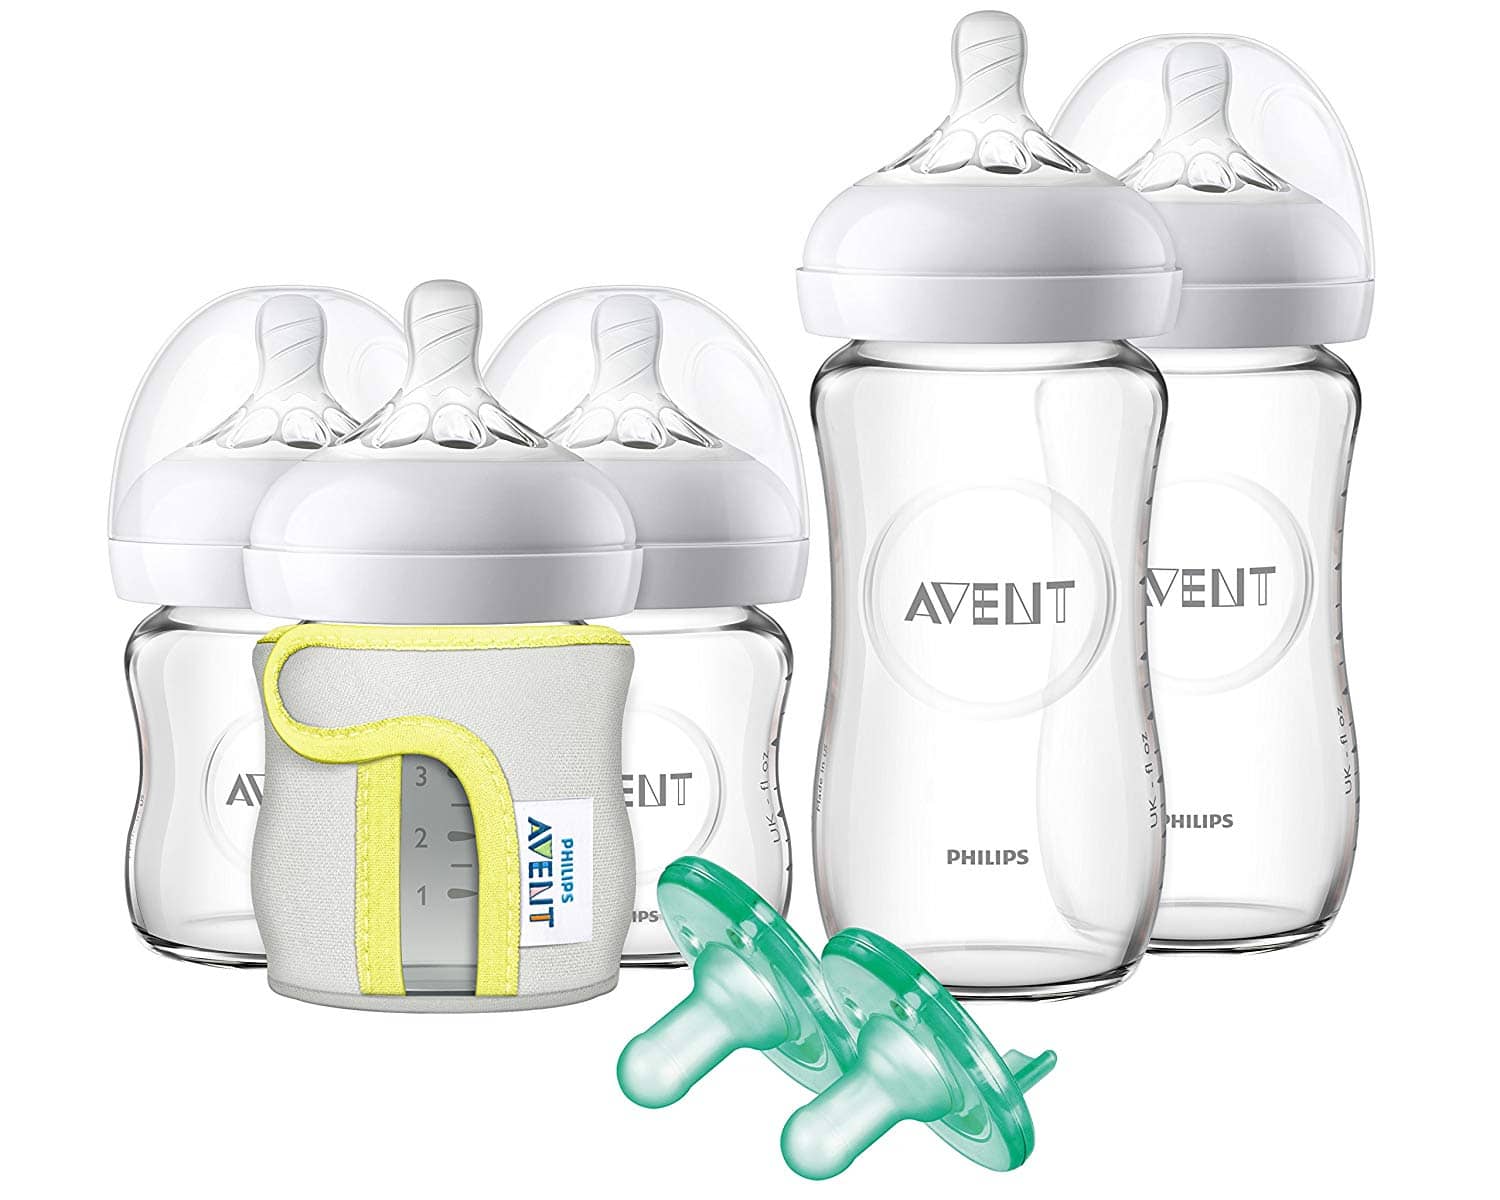 Philips Avent glass bottle gift set with two large bottles, three small and two silicone pacifiers and a bottle sleeve